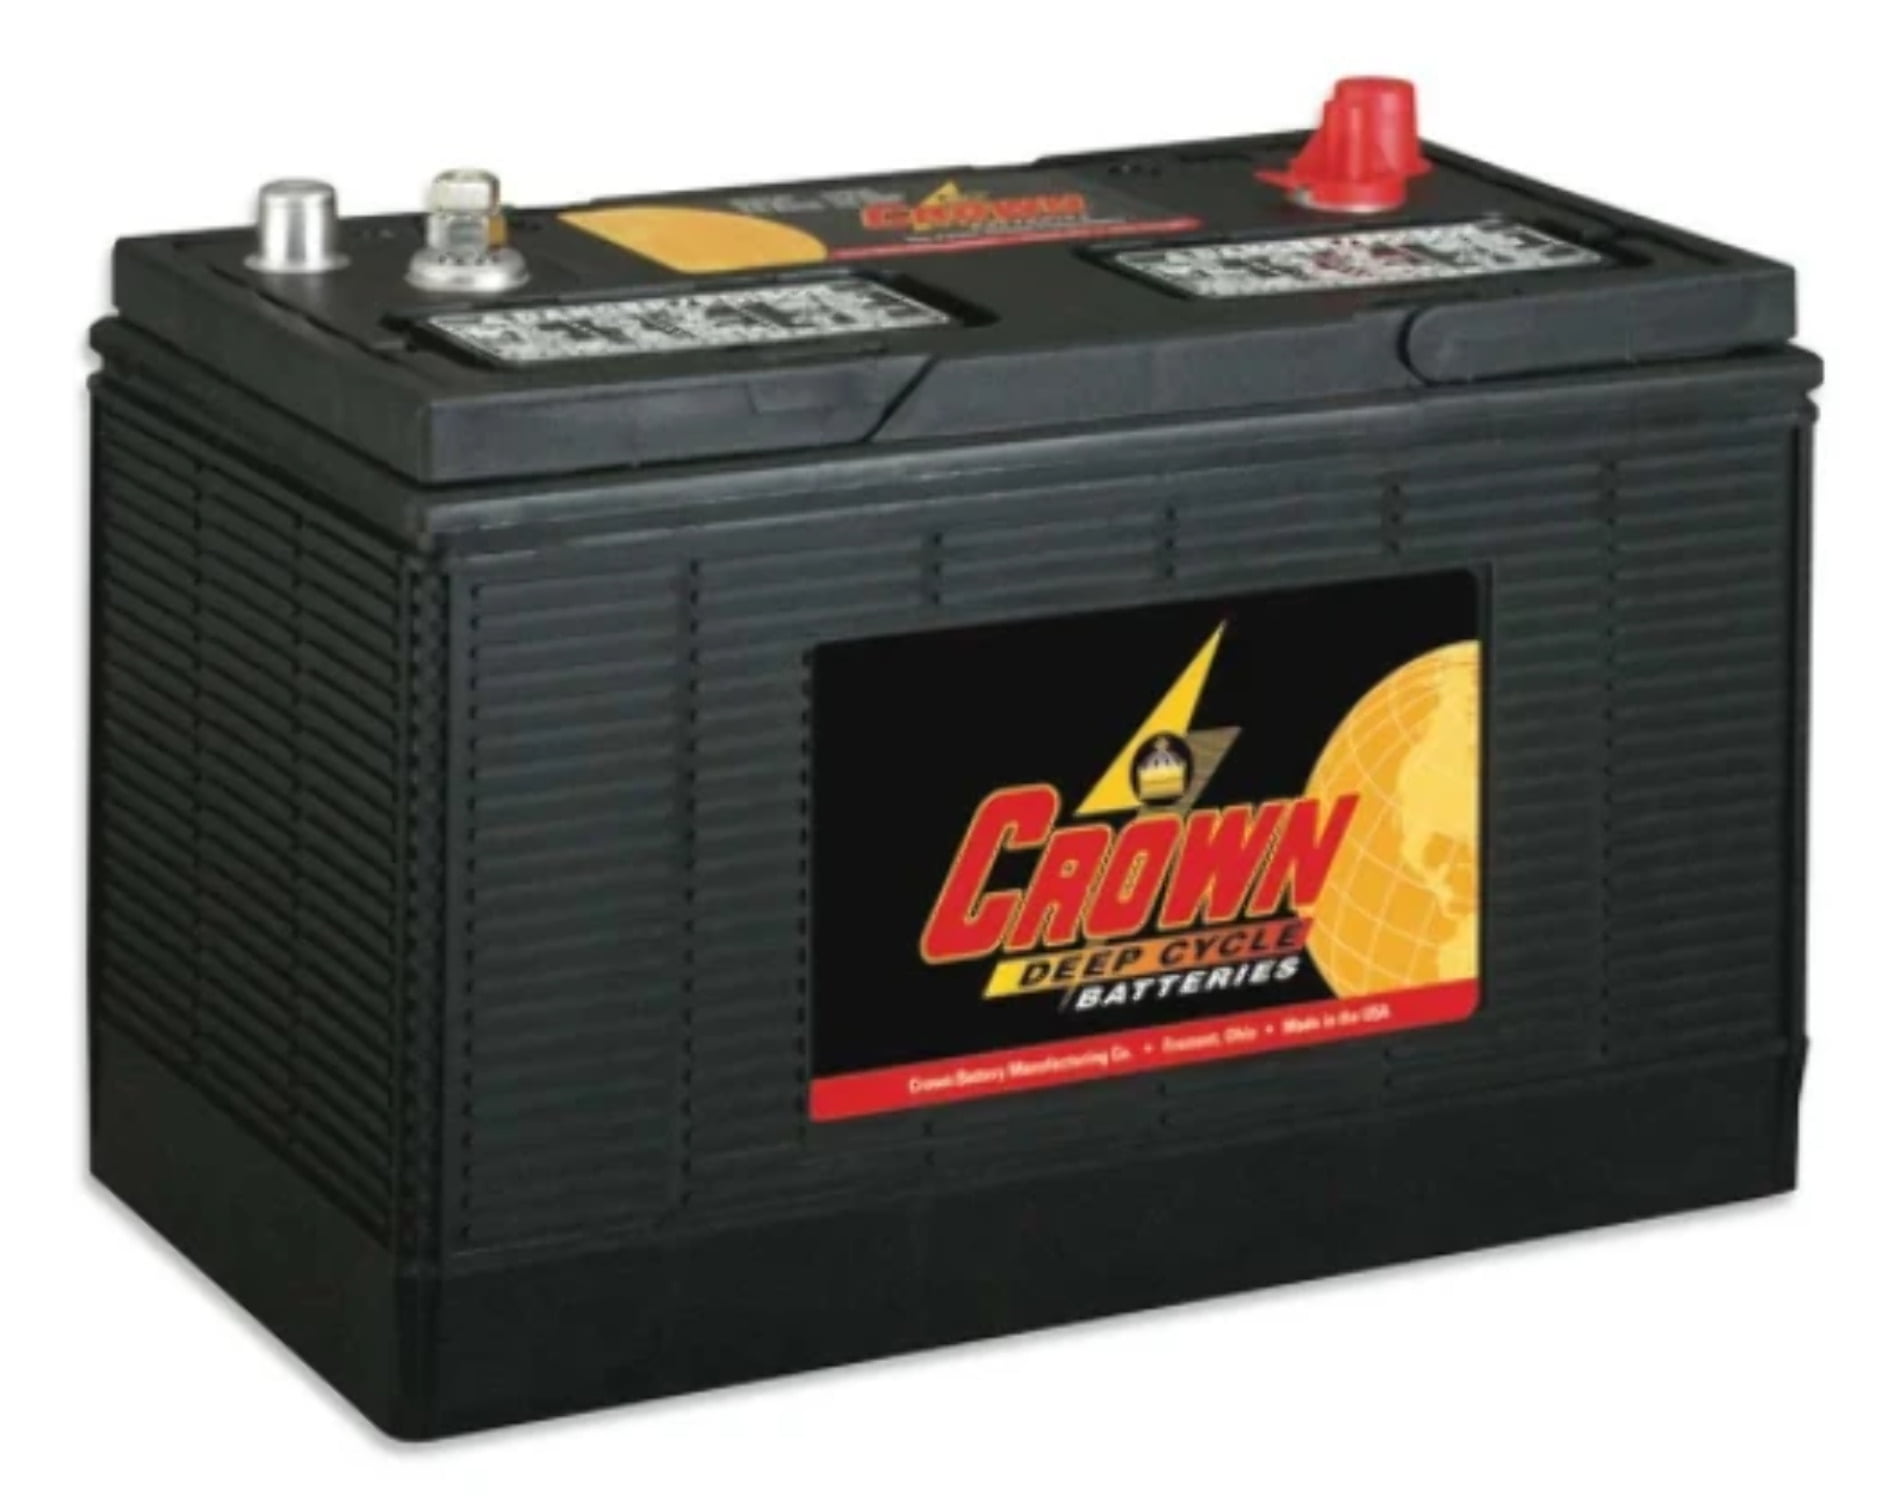 Semi Truck Heavy Duty Battery 1050 / 950 Made in USA / PICKUP ONLY - We